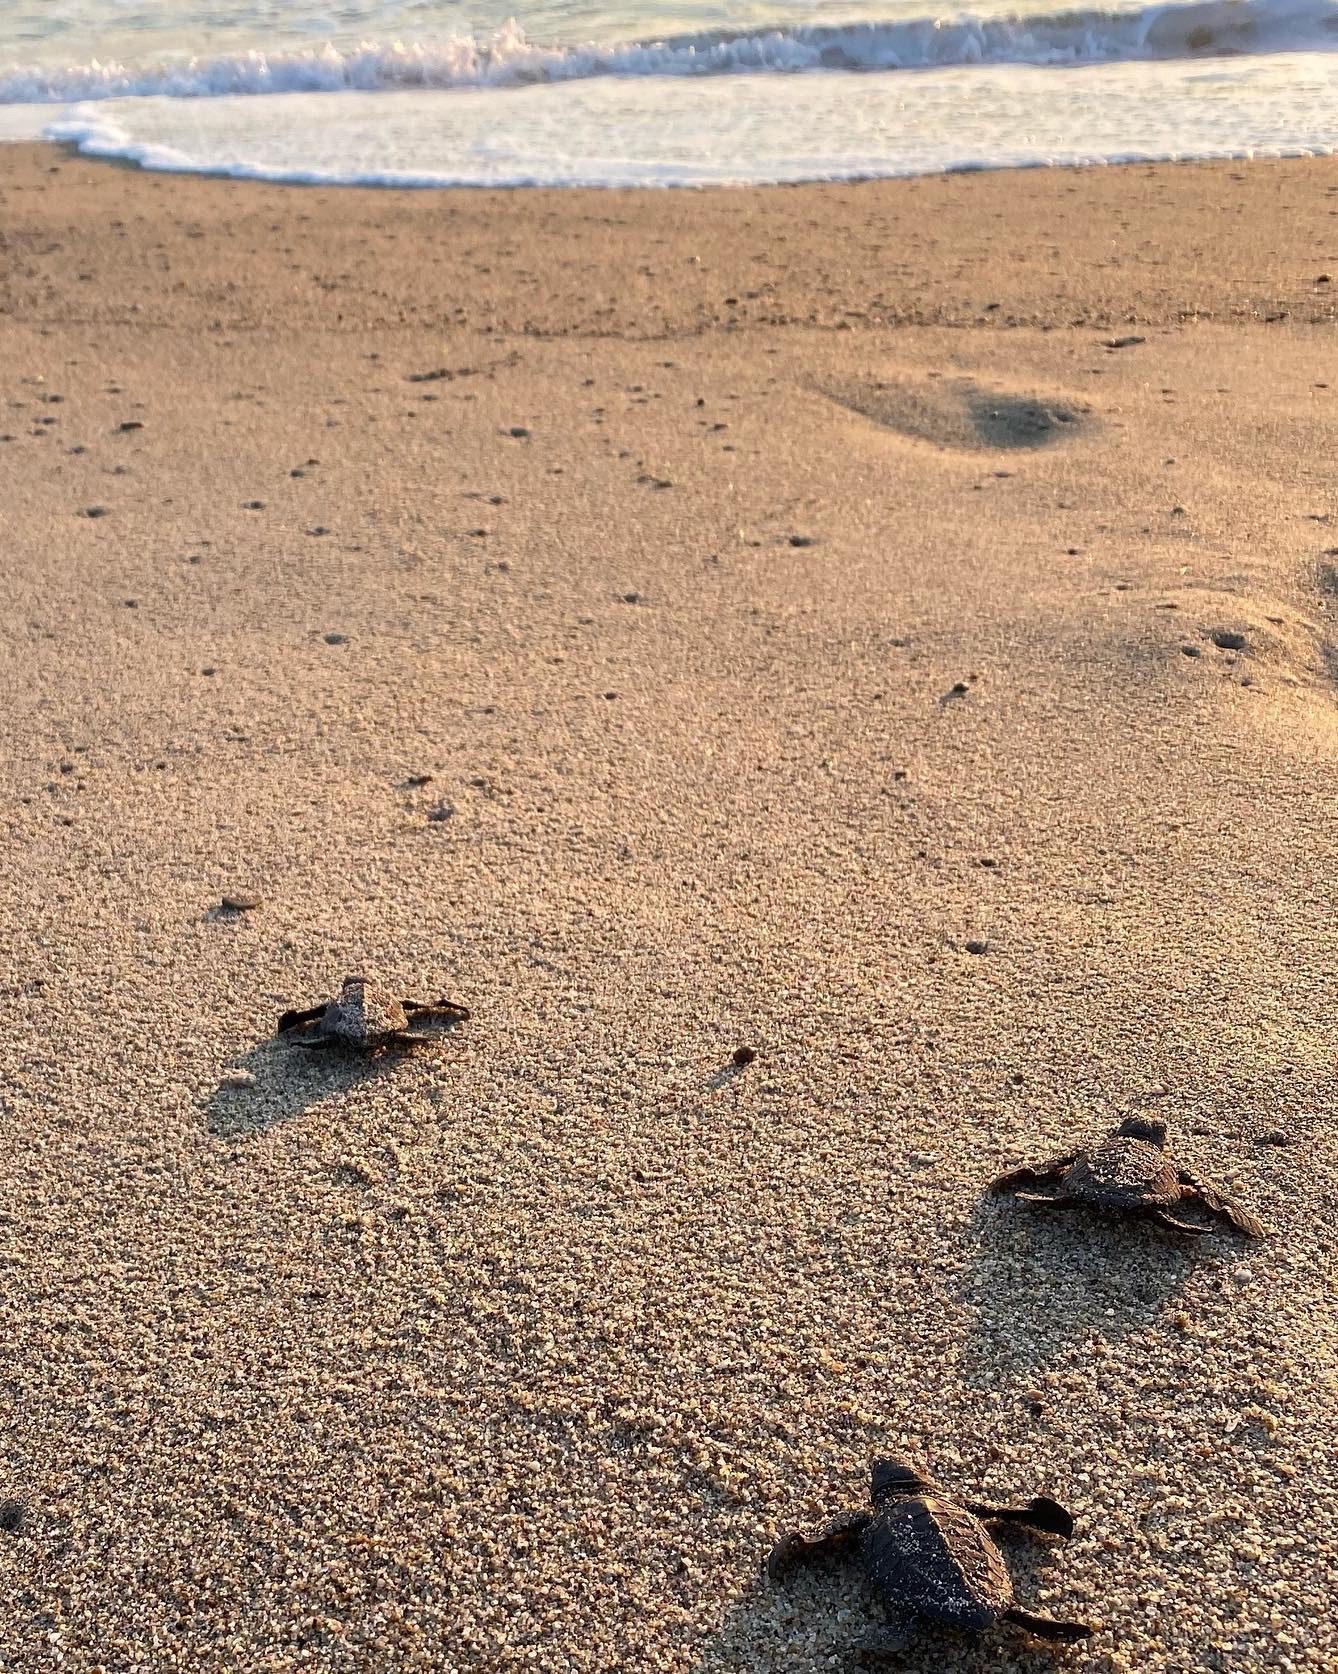 Baby sea turtles in Puerto Escondido making their way to the sea